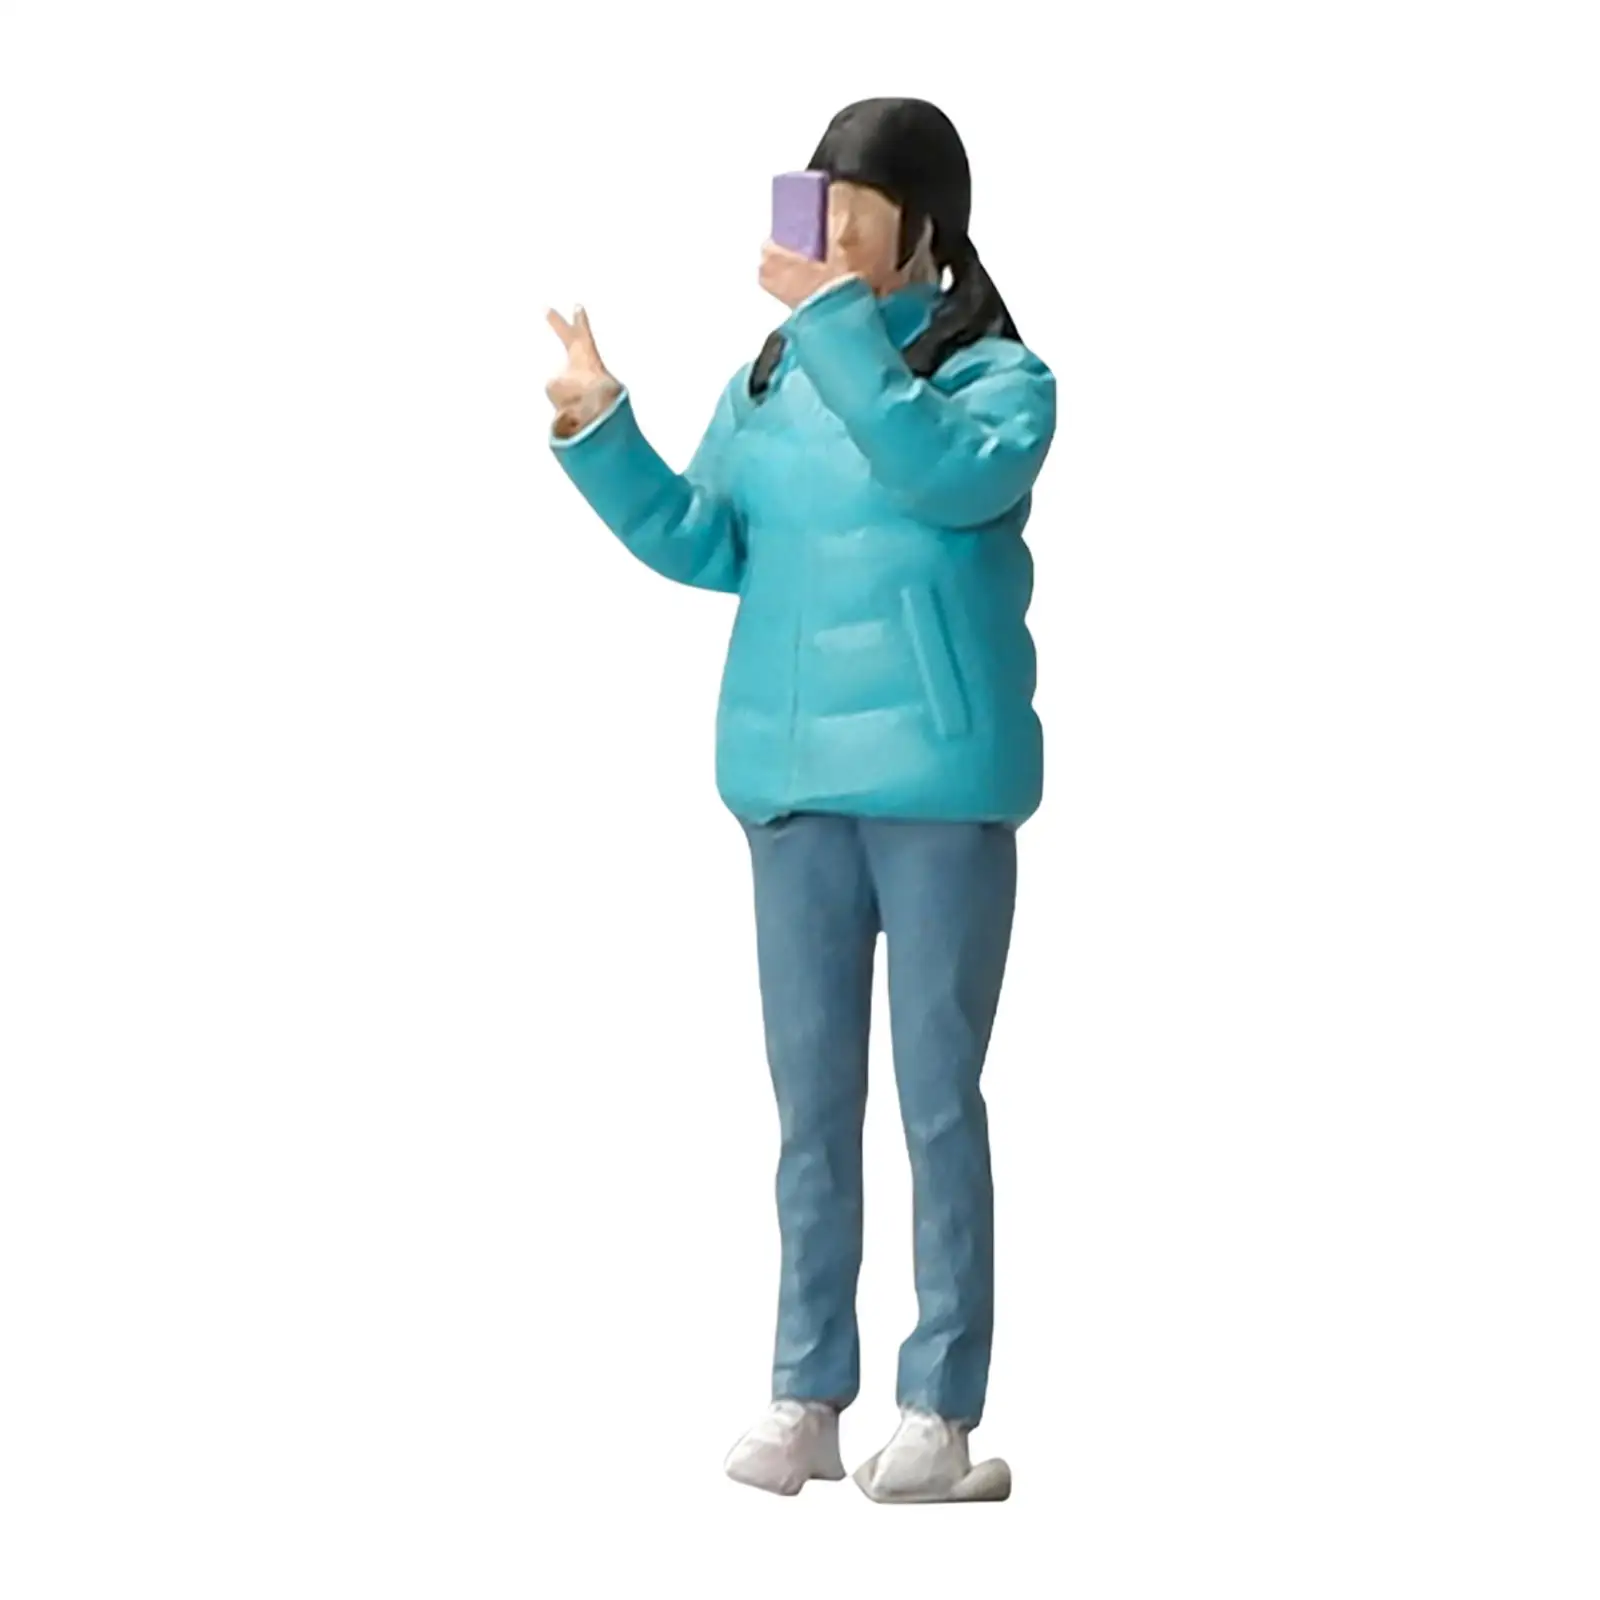 1:64 People Figures Down Jacket Girl Trains Architectural People Figures Tiny People Model for Miniature Scene Layout Decor